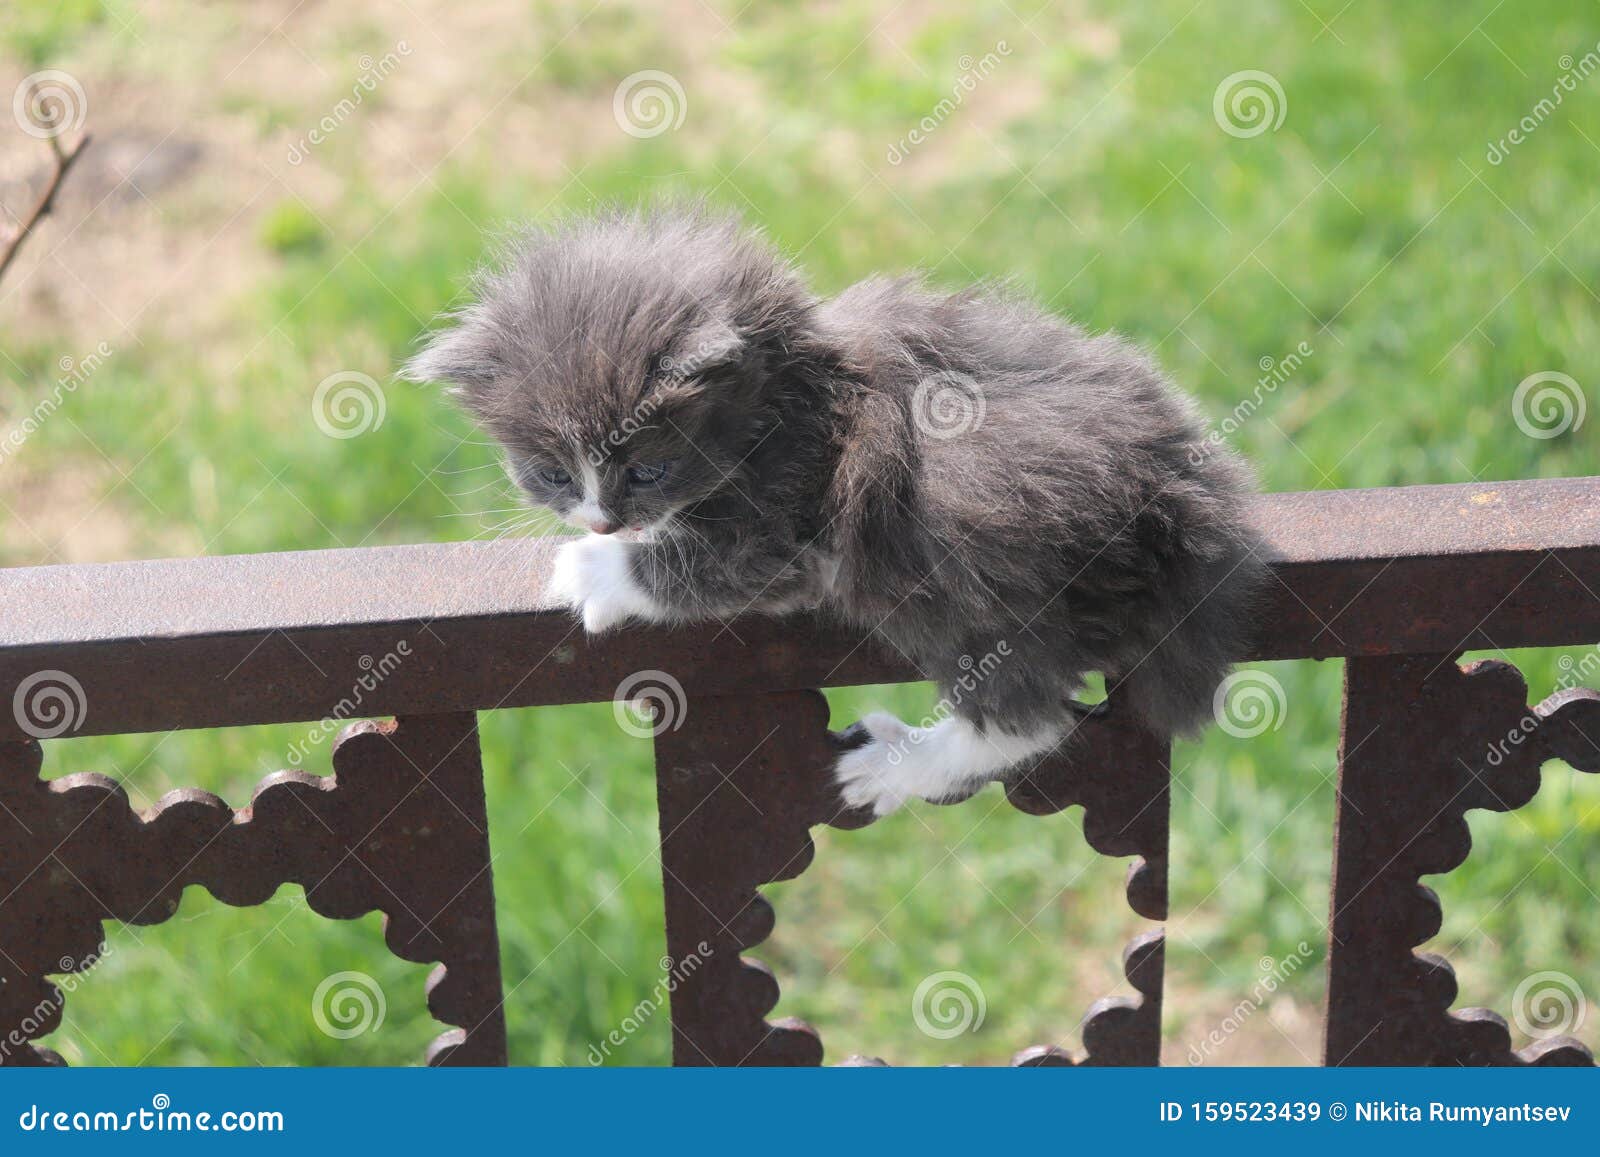 cat on the fence.